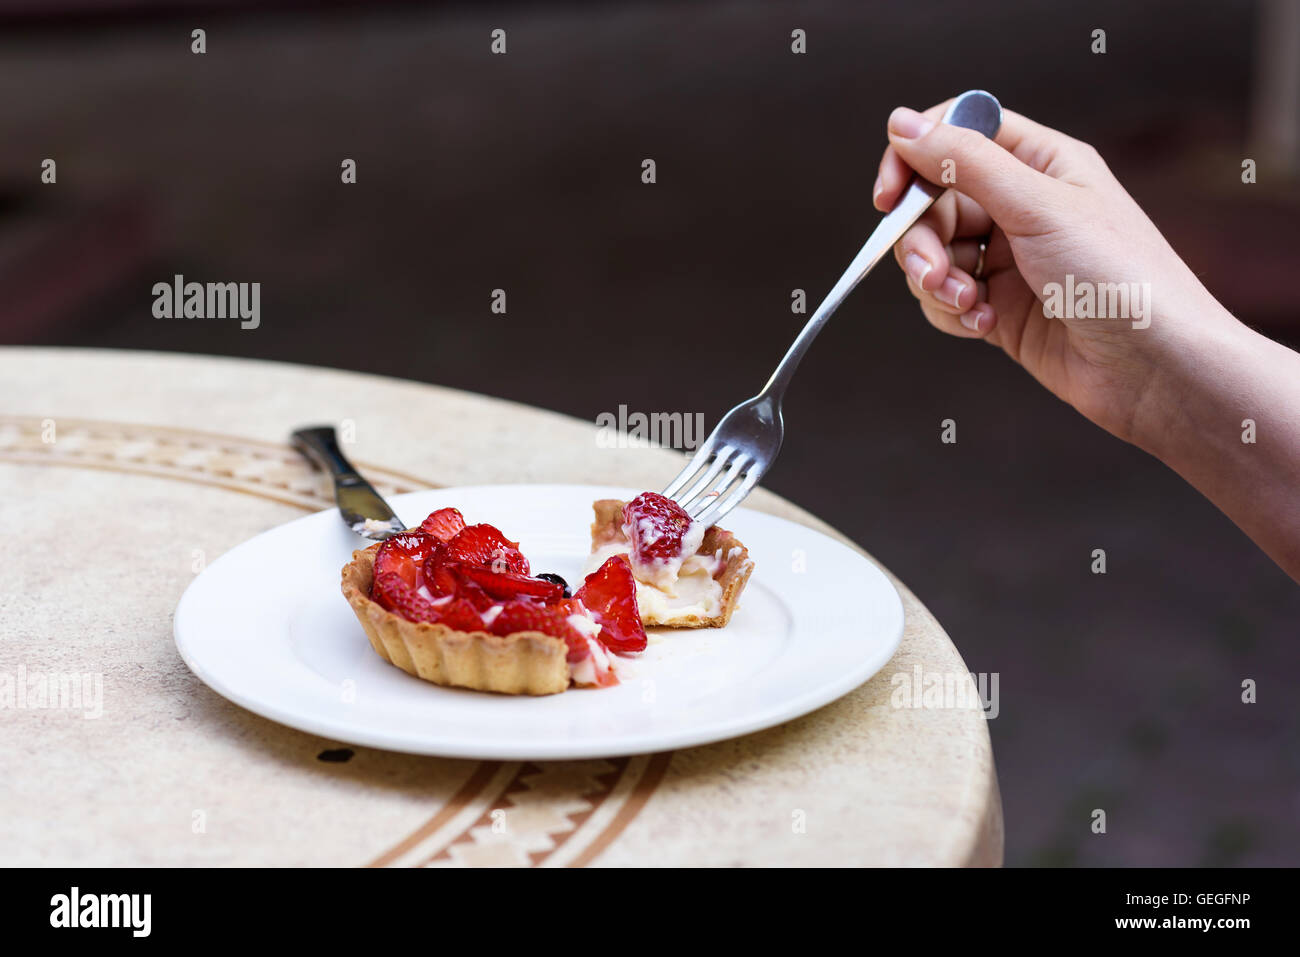 Photo of female hands cutting a fruit cake with strawberries, mint and blackcurrant, on a white plate on a restaurant table. Stock Photo